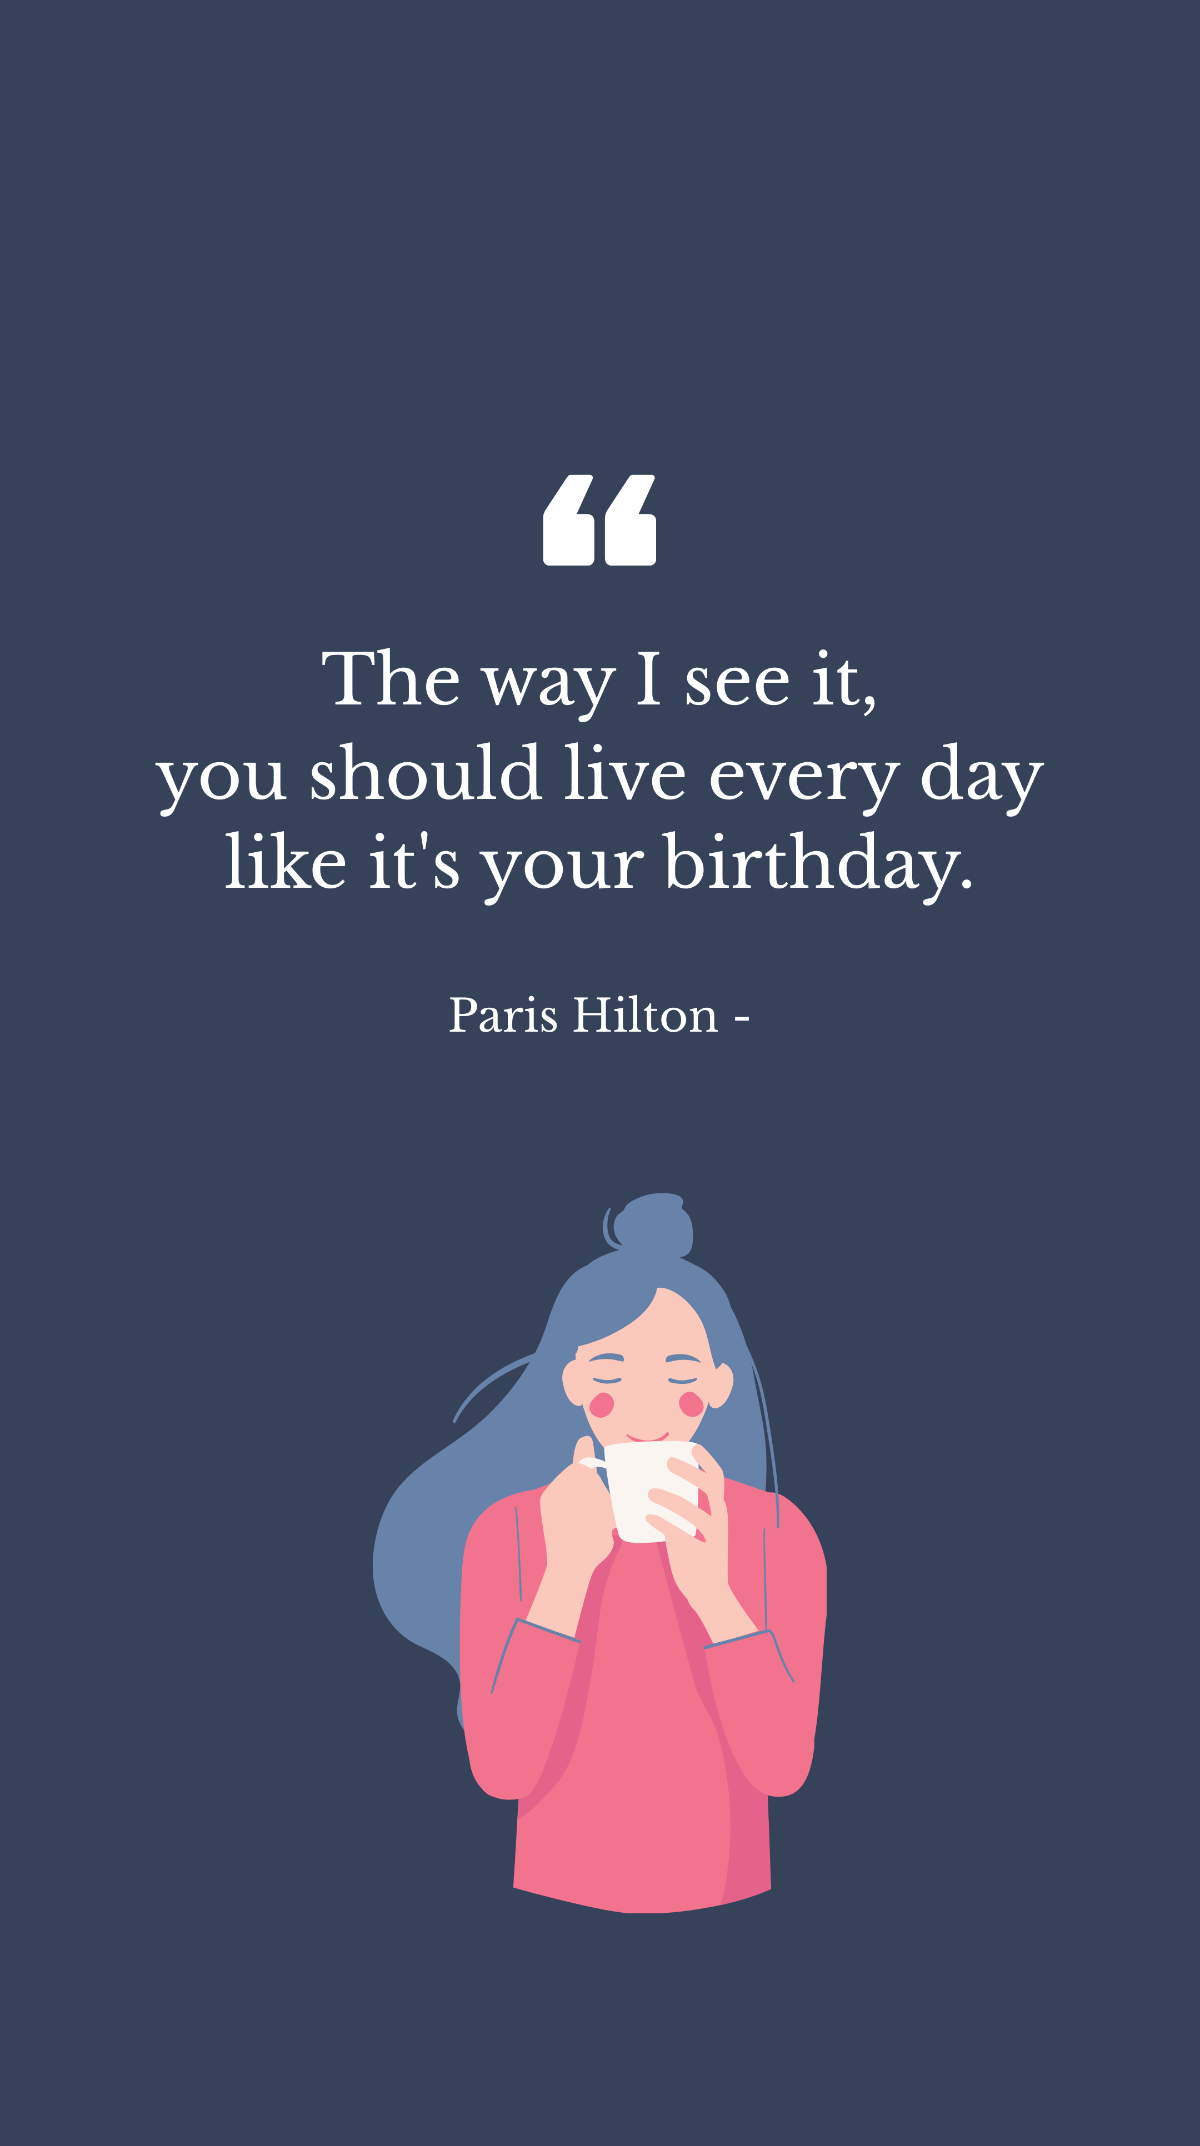 Paris Hilton - The way I see it, you should live every day like it's your birthday. Template